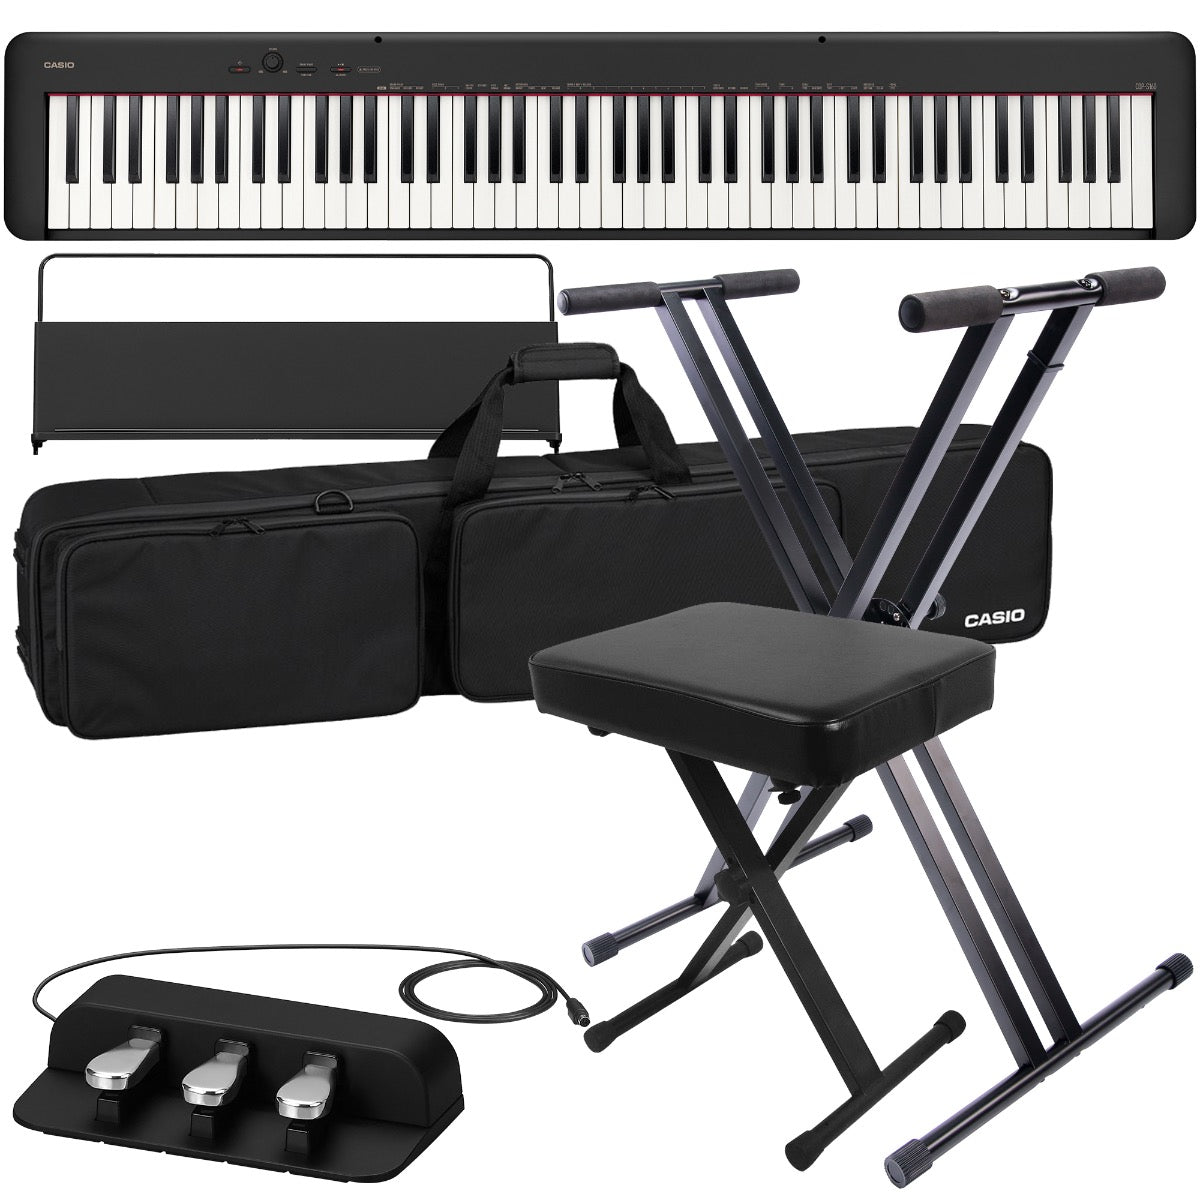 Casio CDP-S160 88-Key Compact Piano Keyboard with Touch Response, Black,  Bundle with H&A Studio Headphones, Stand, Bench, Sustain Pedal